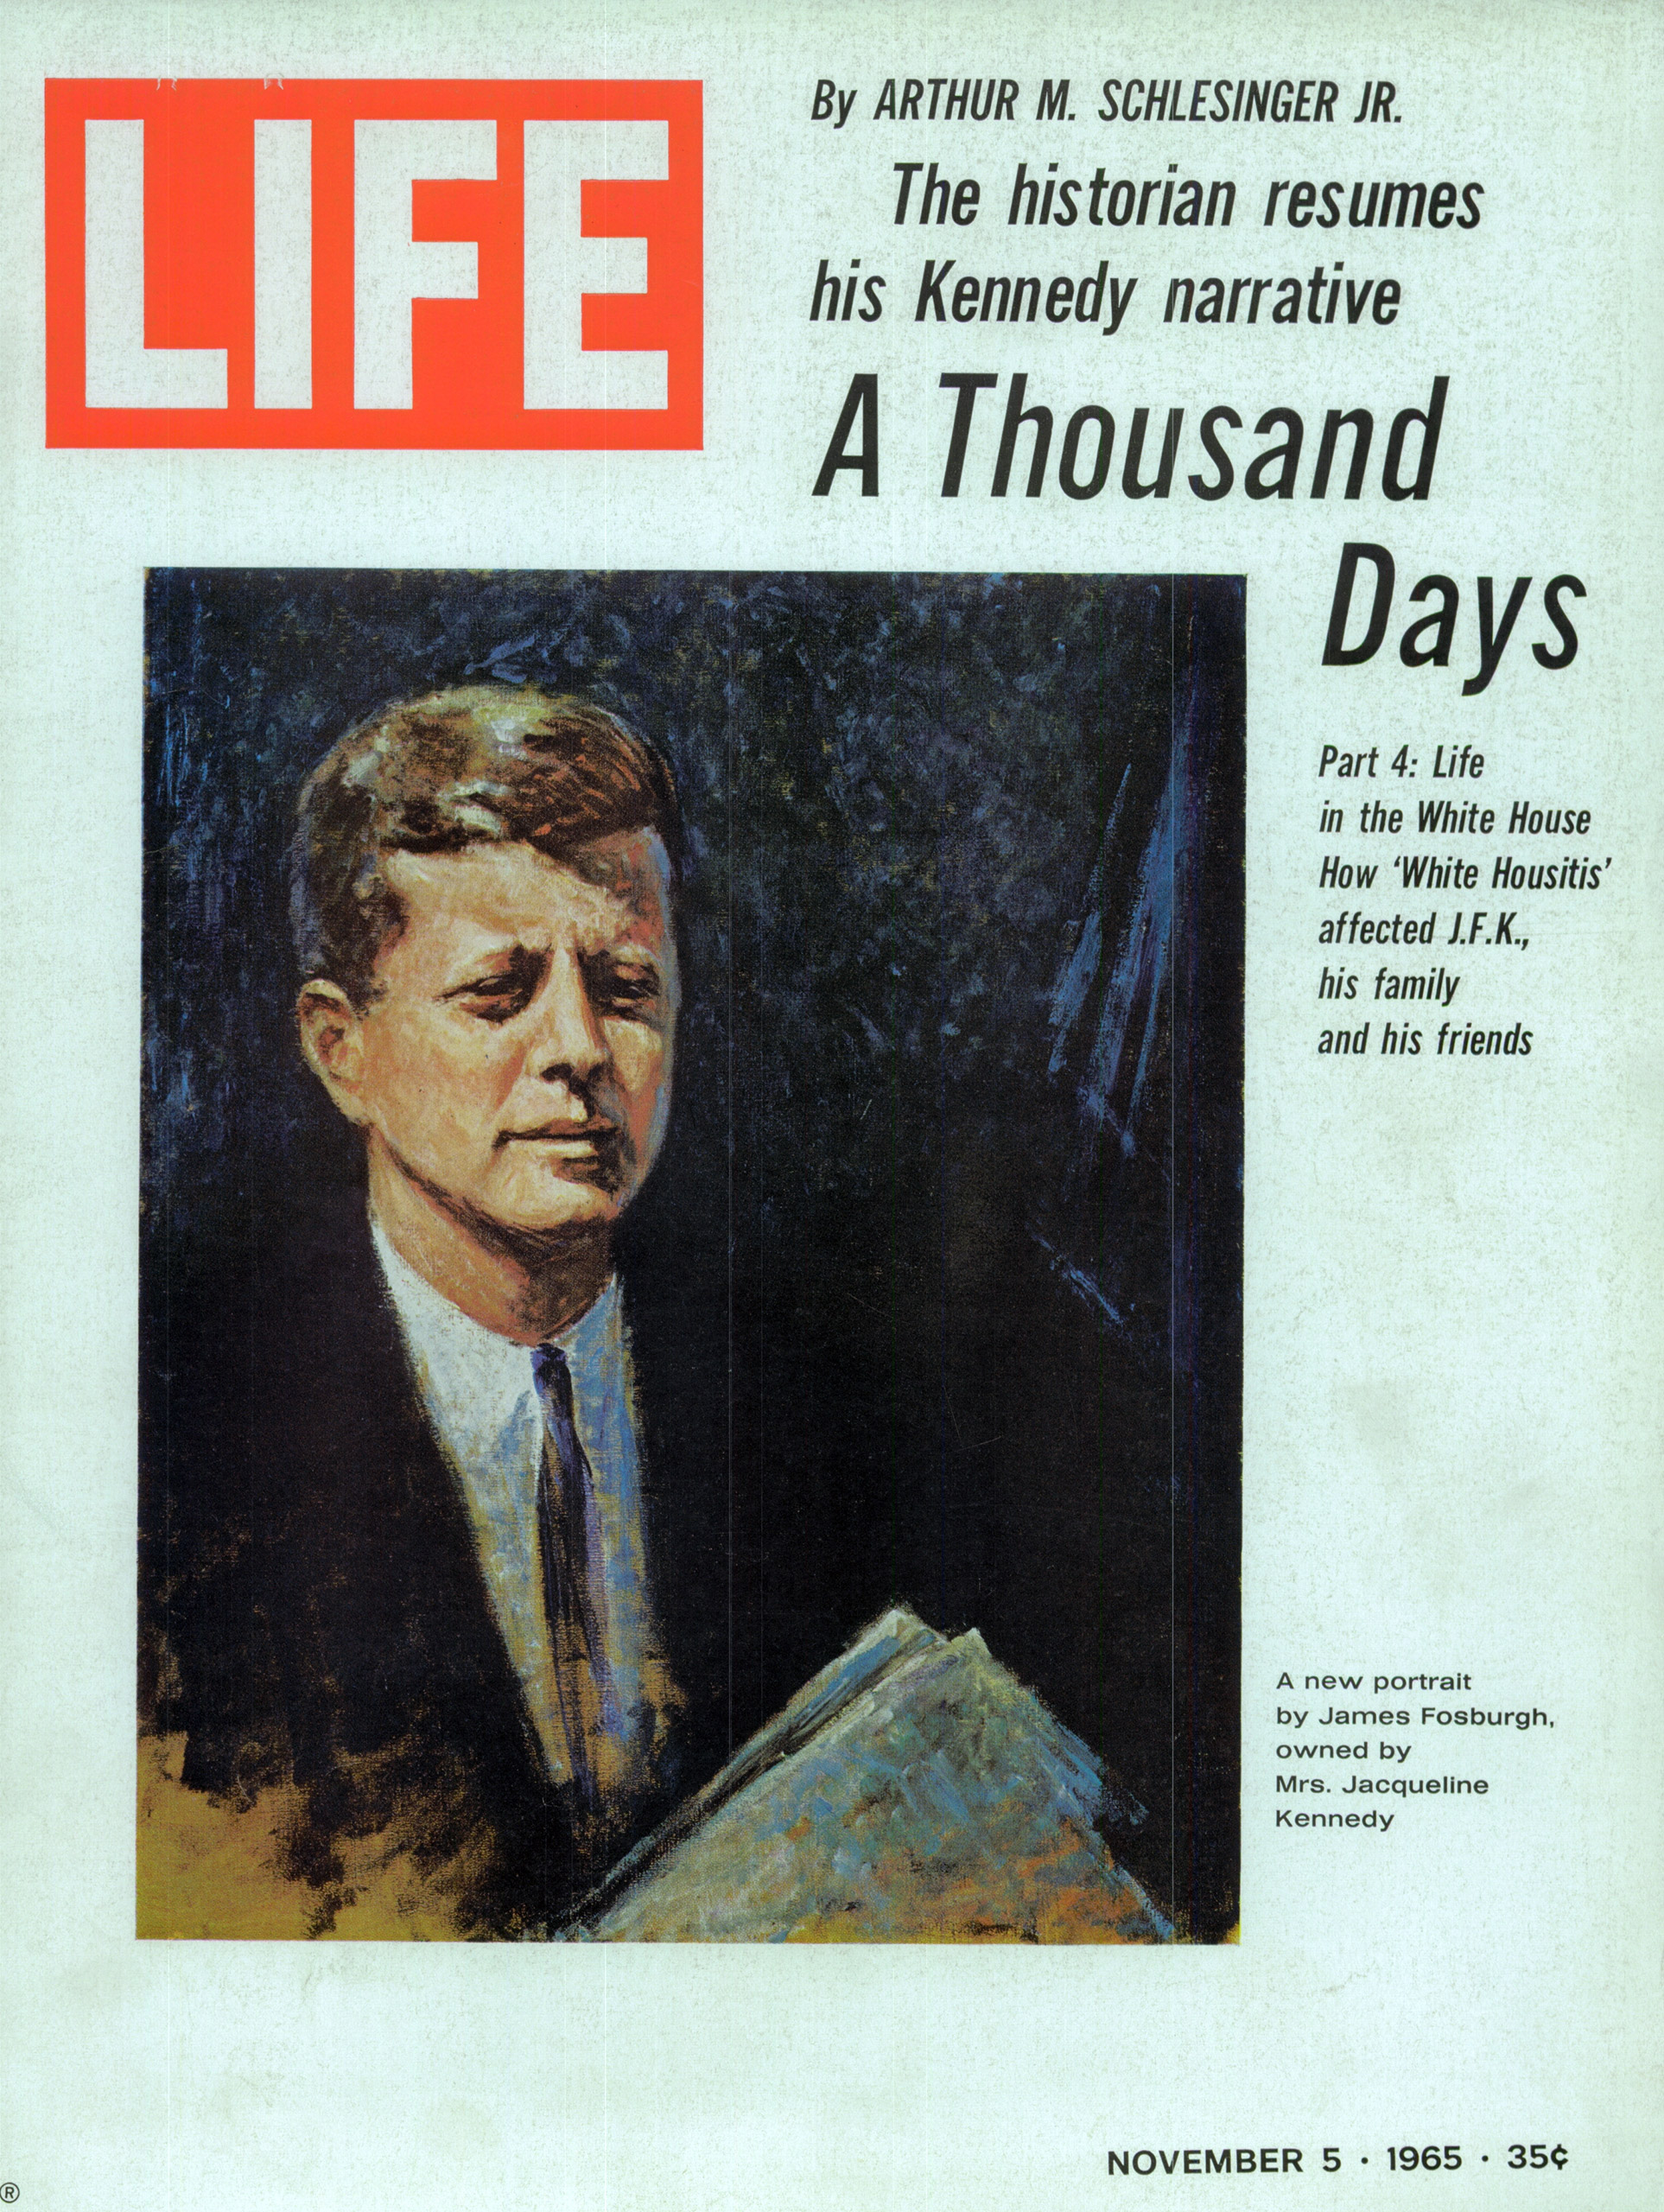 Nov. 5, 1965 cover of LIFE magazine. Cover painting by James Fosburgh.